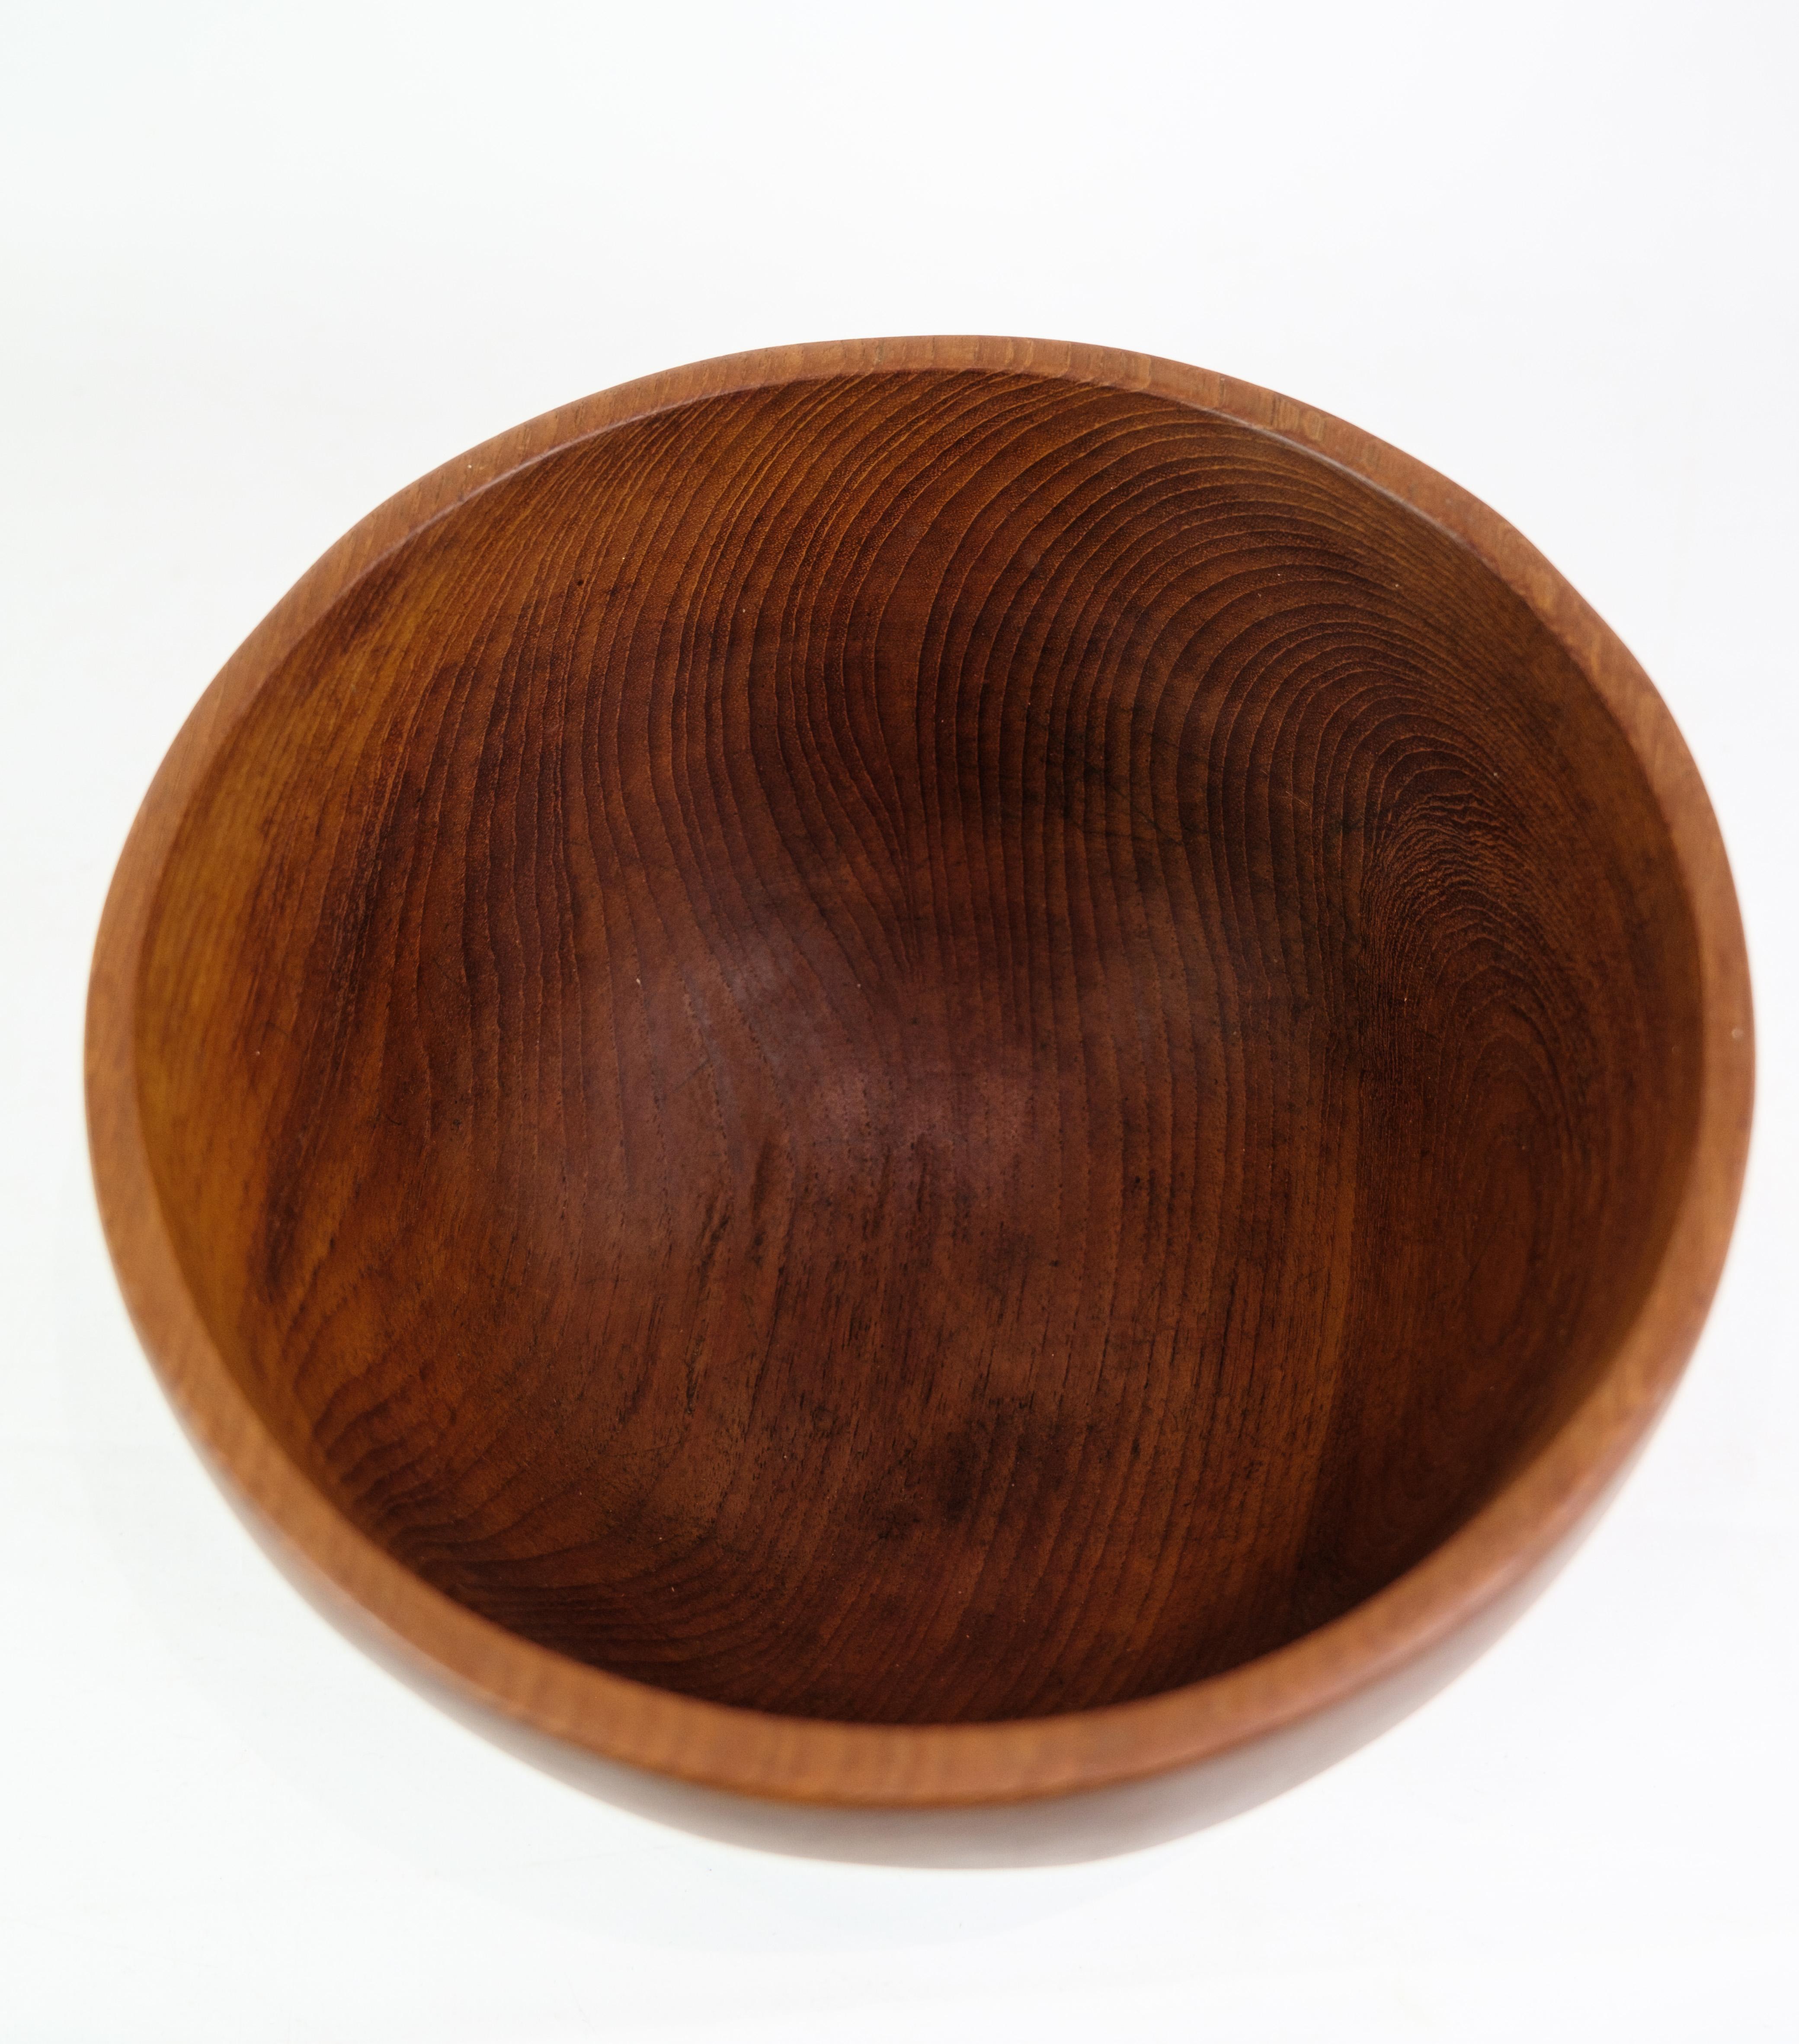 Mid-20th Century Bowl Made In Teak, Danish Design From 1960s For Sale